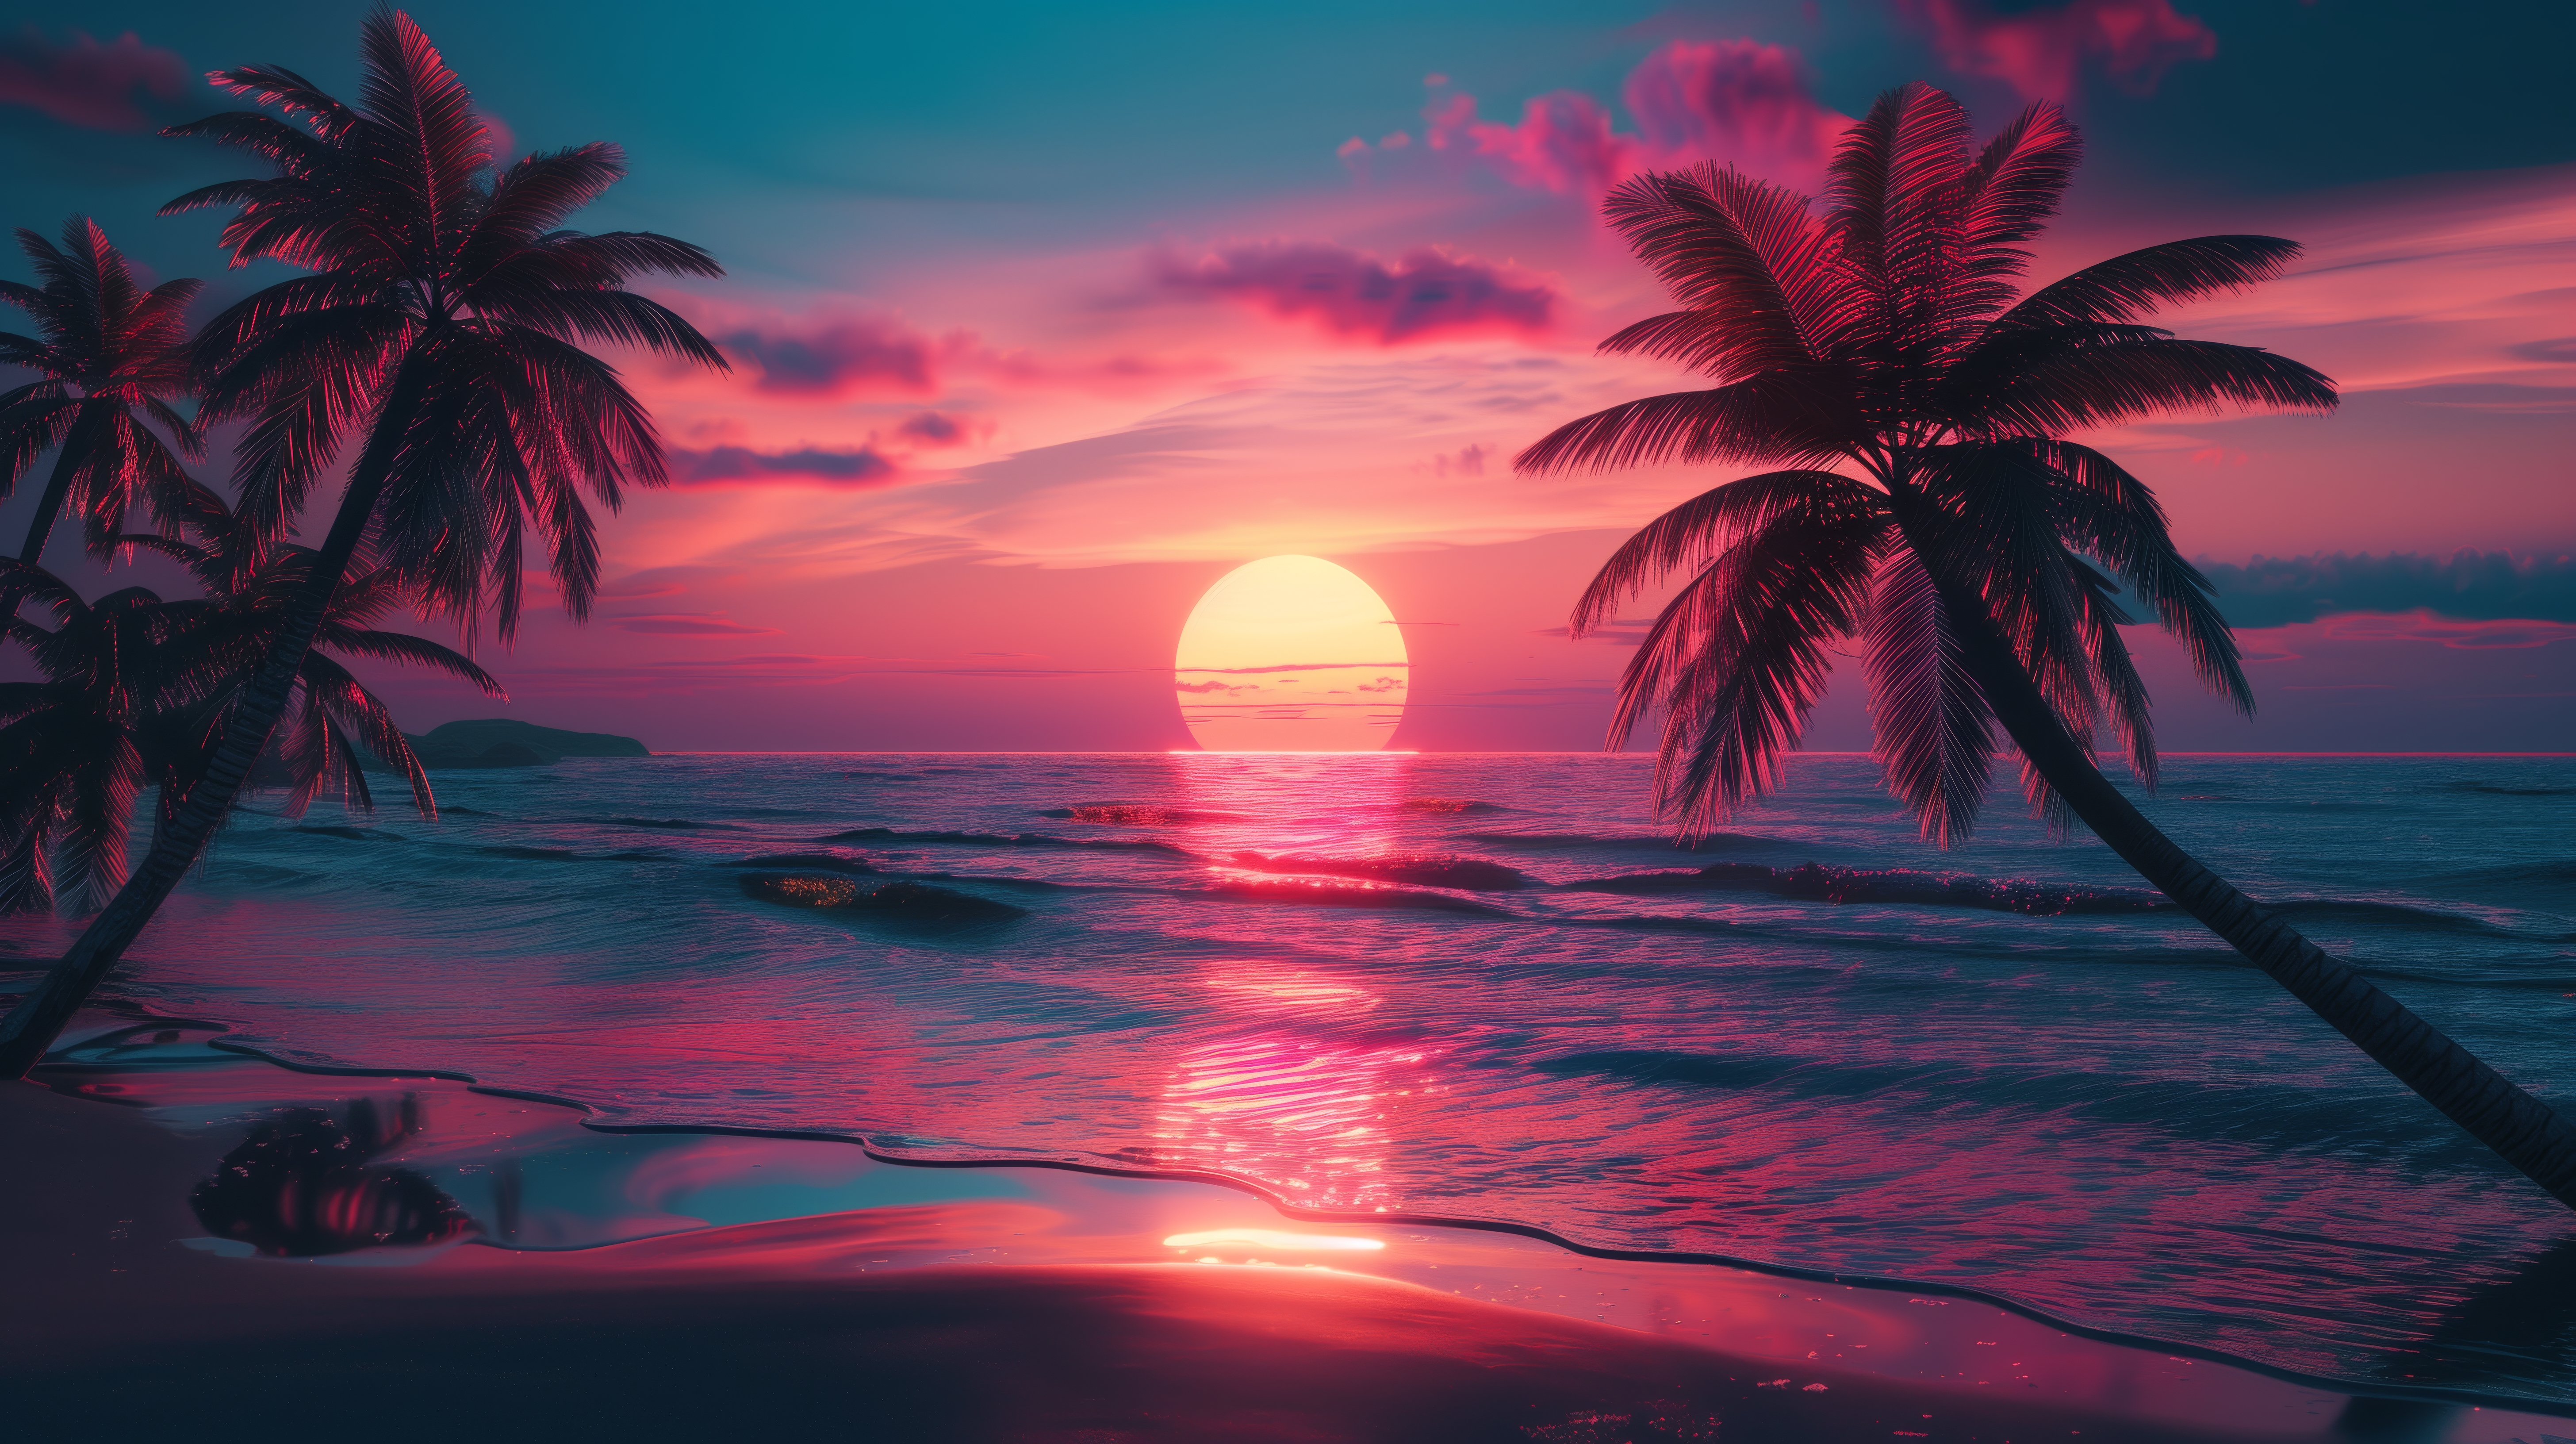 Synthwave Sunset Palm Trees Beach Waves Sea Clouds 5824x3264